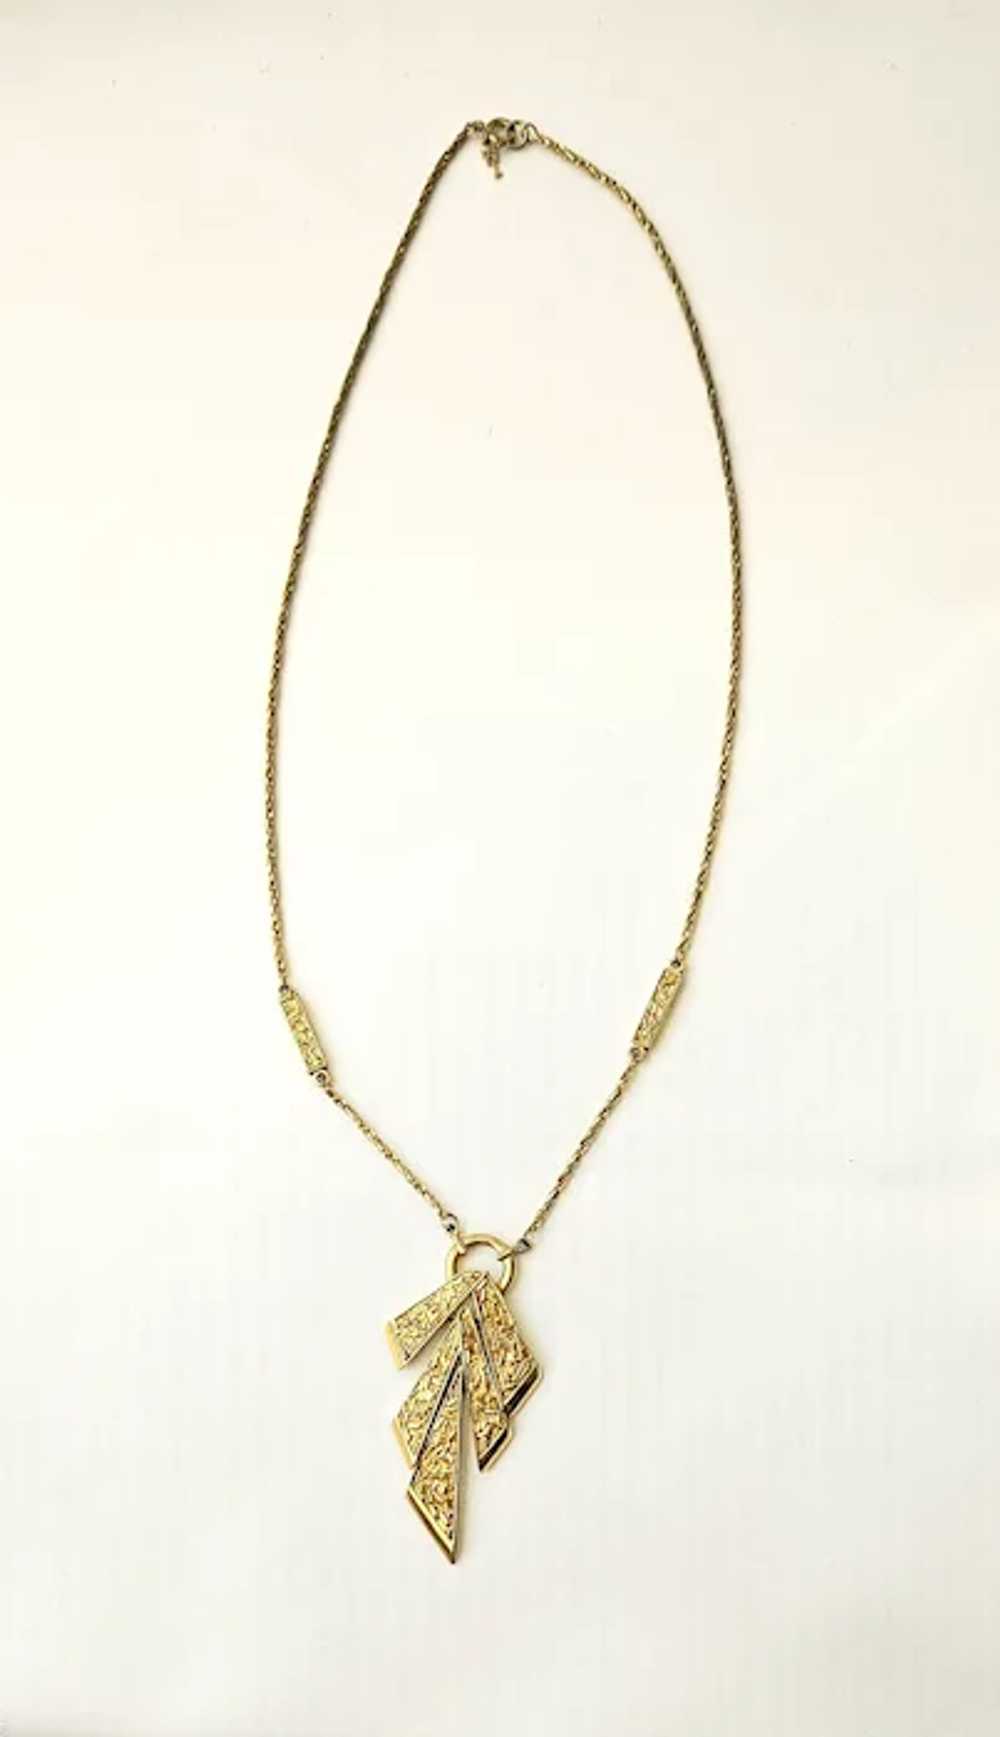 Vintage Trifari Gold-Tone Metal Sections Necklace - image 5